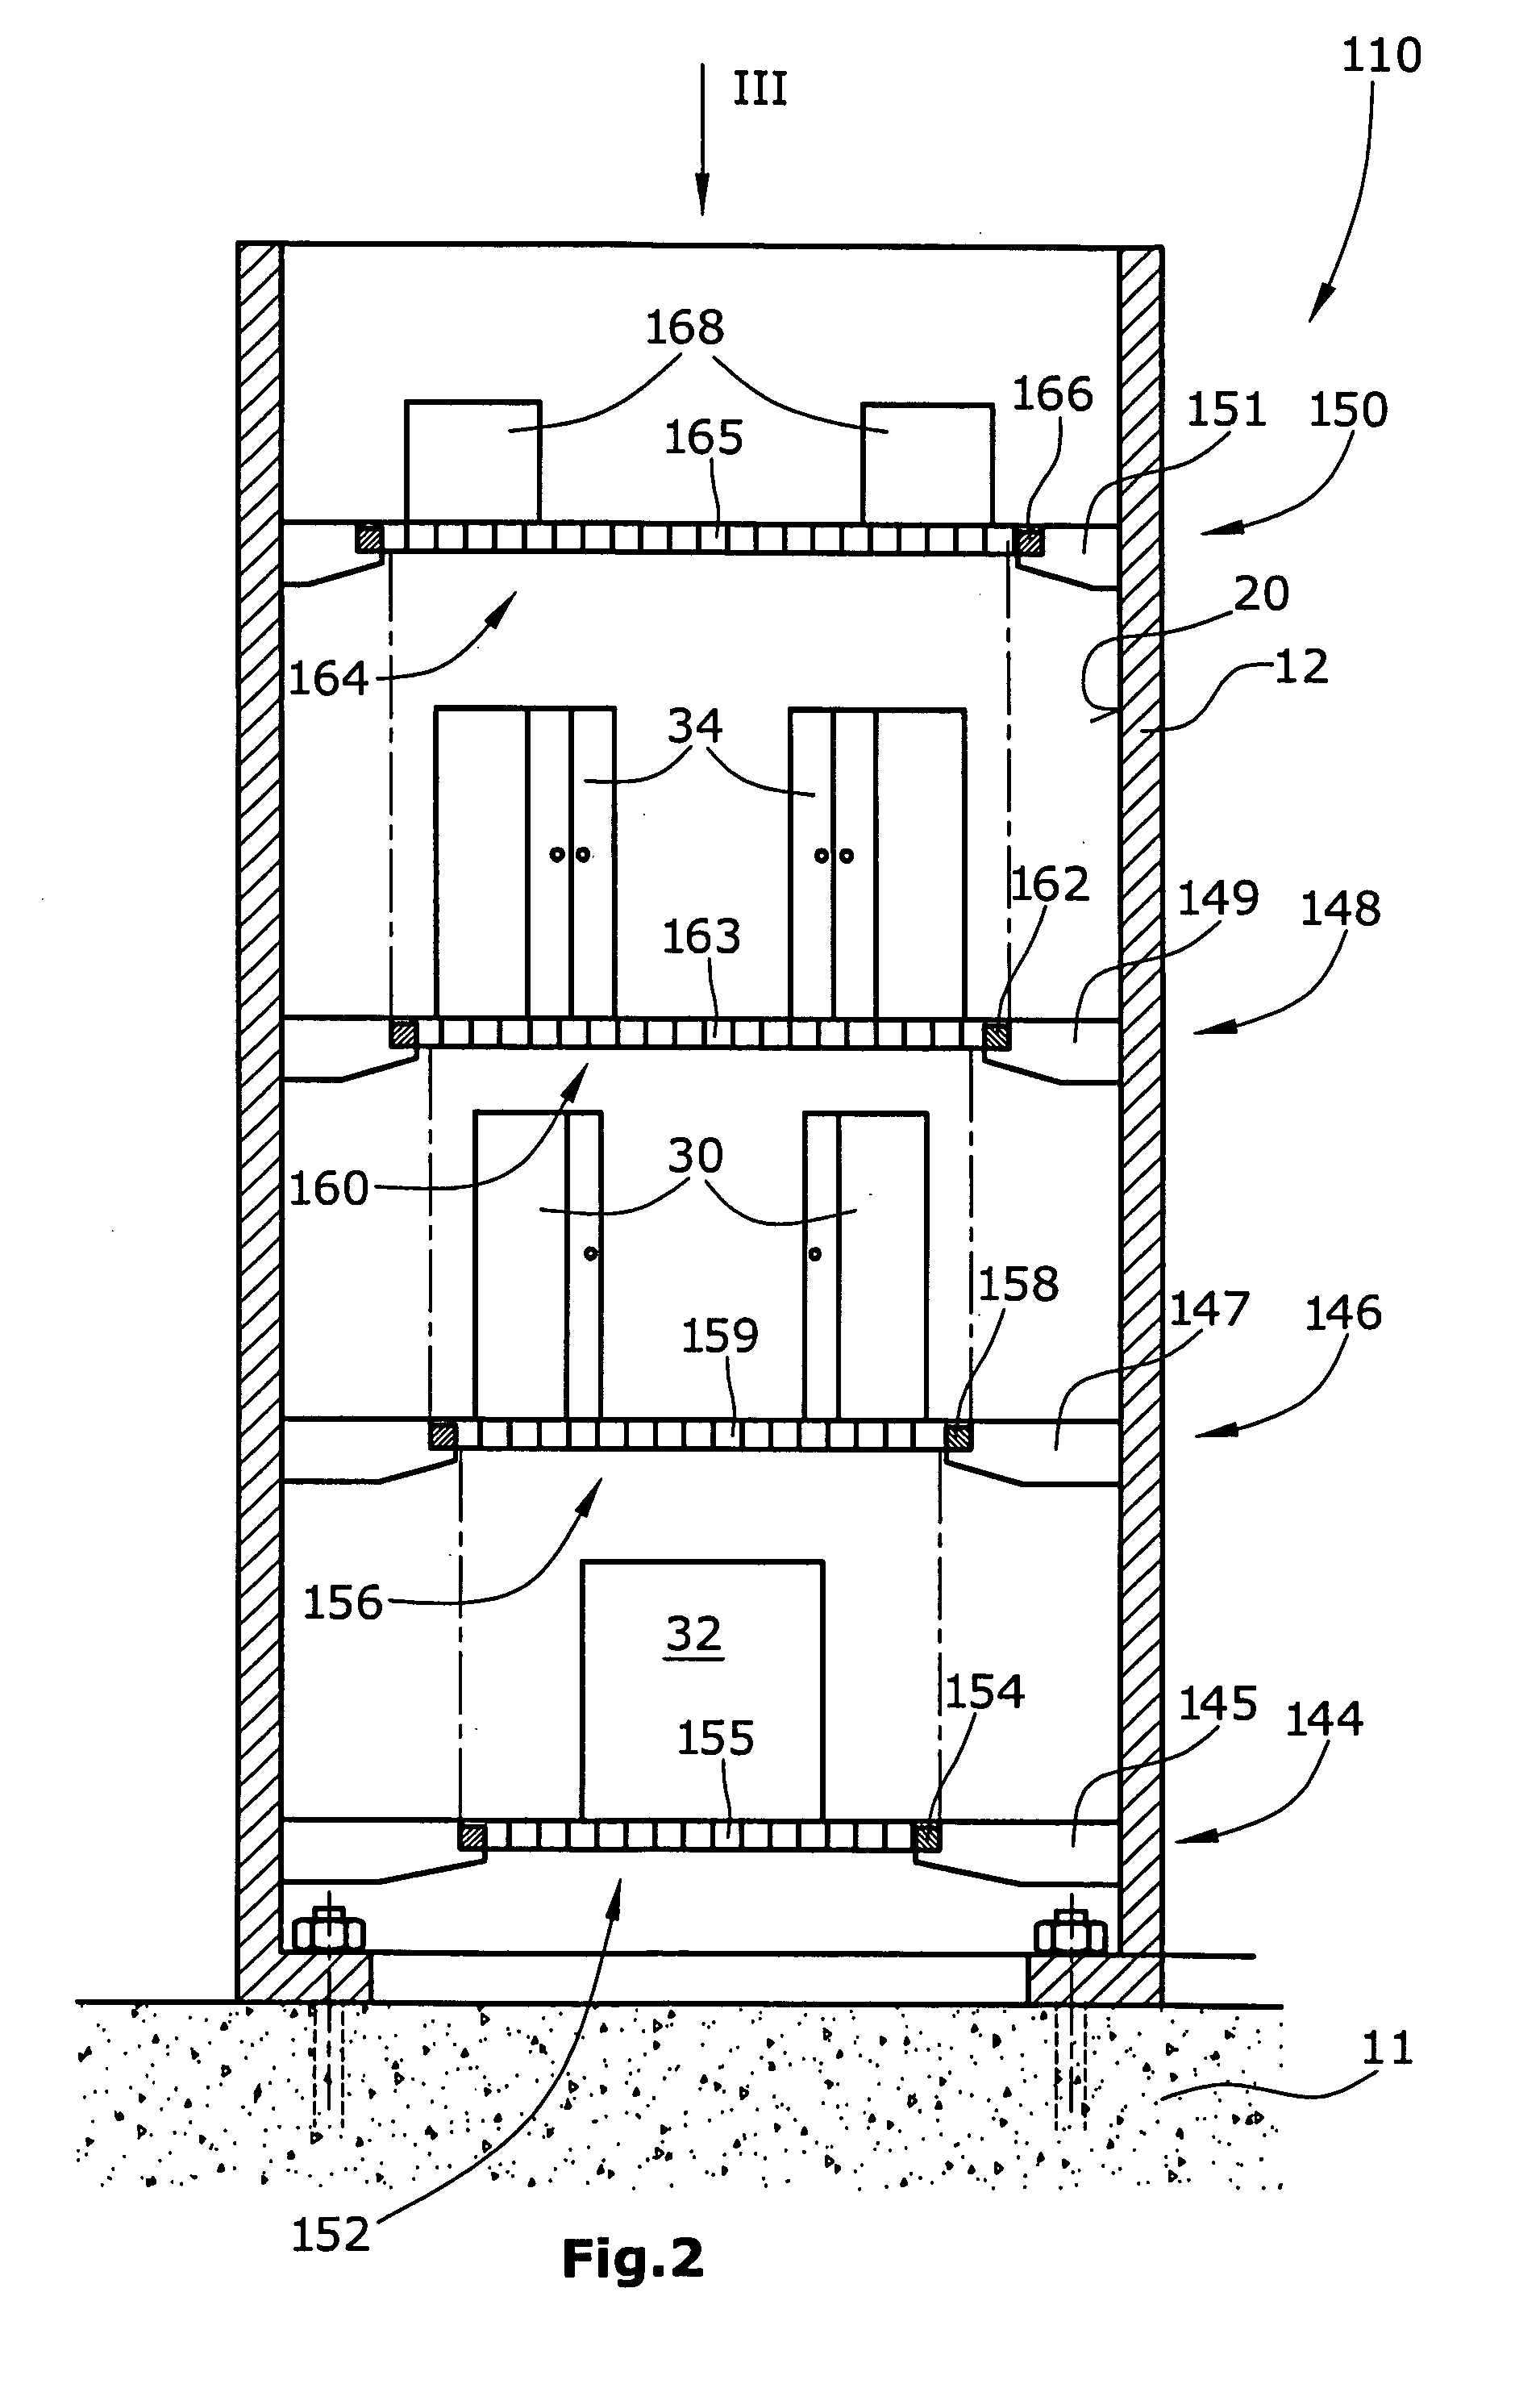 Segment for a tower of a wind energy turbine and method for arranging operating components of a wind energy turbine in a tower thereof